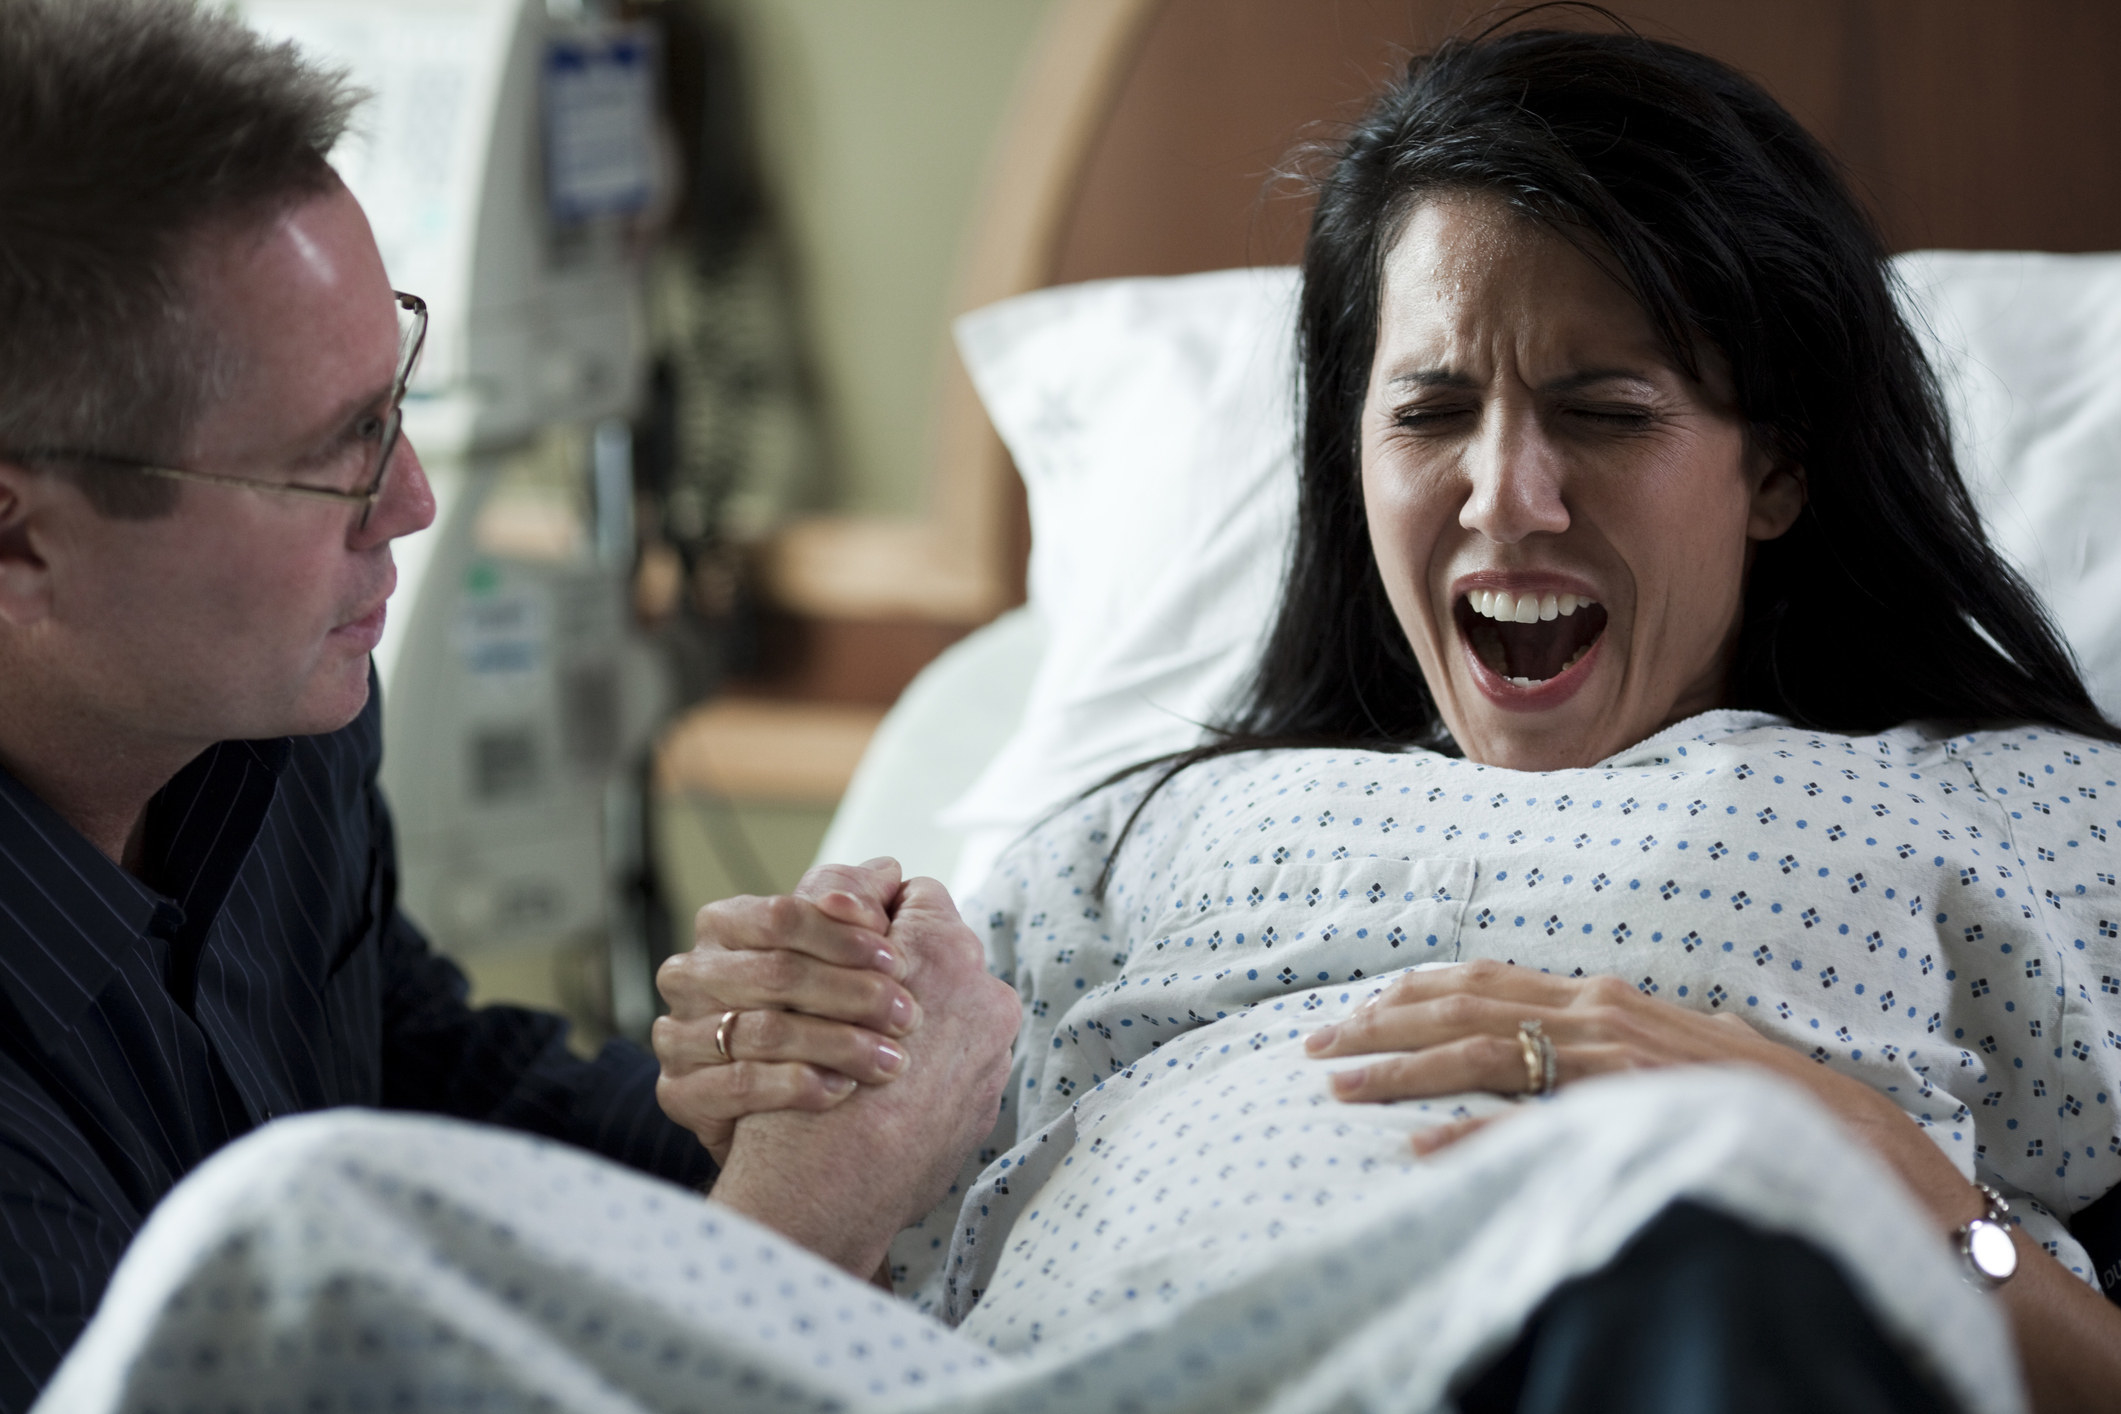 A woman screaming while in labor